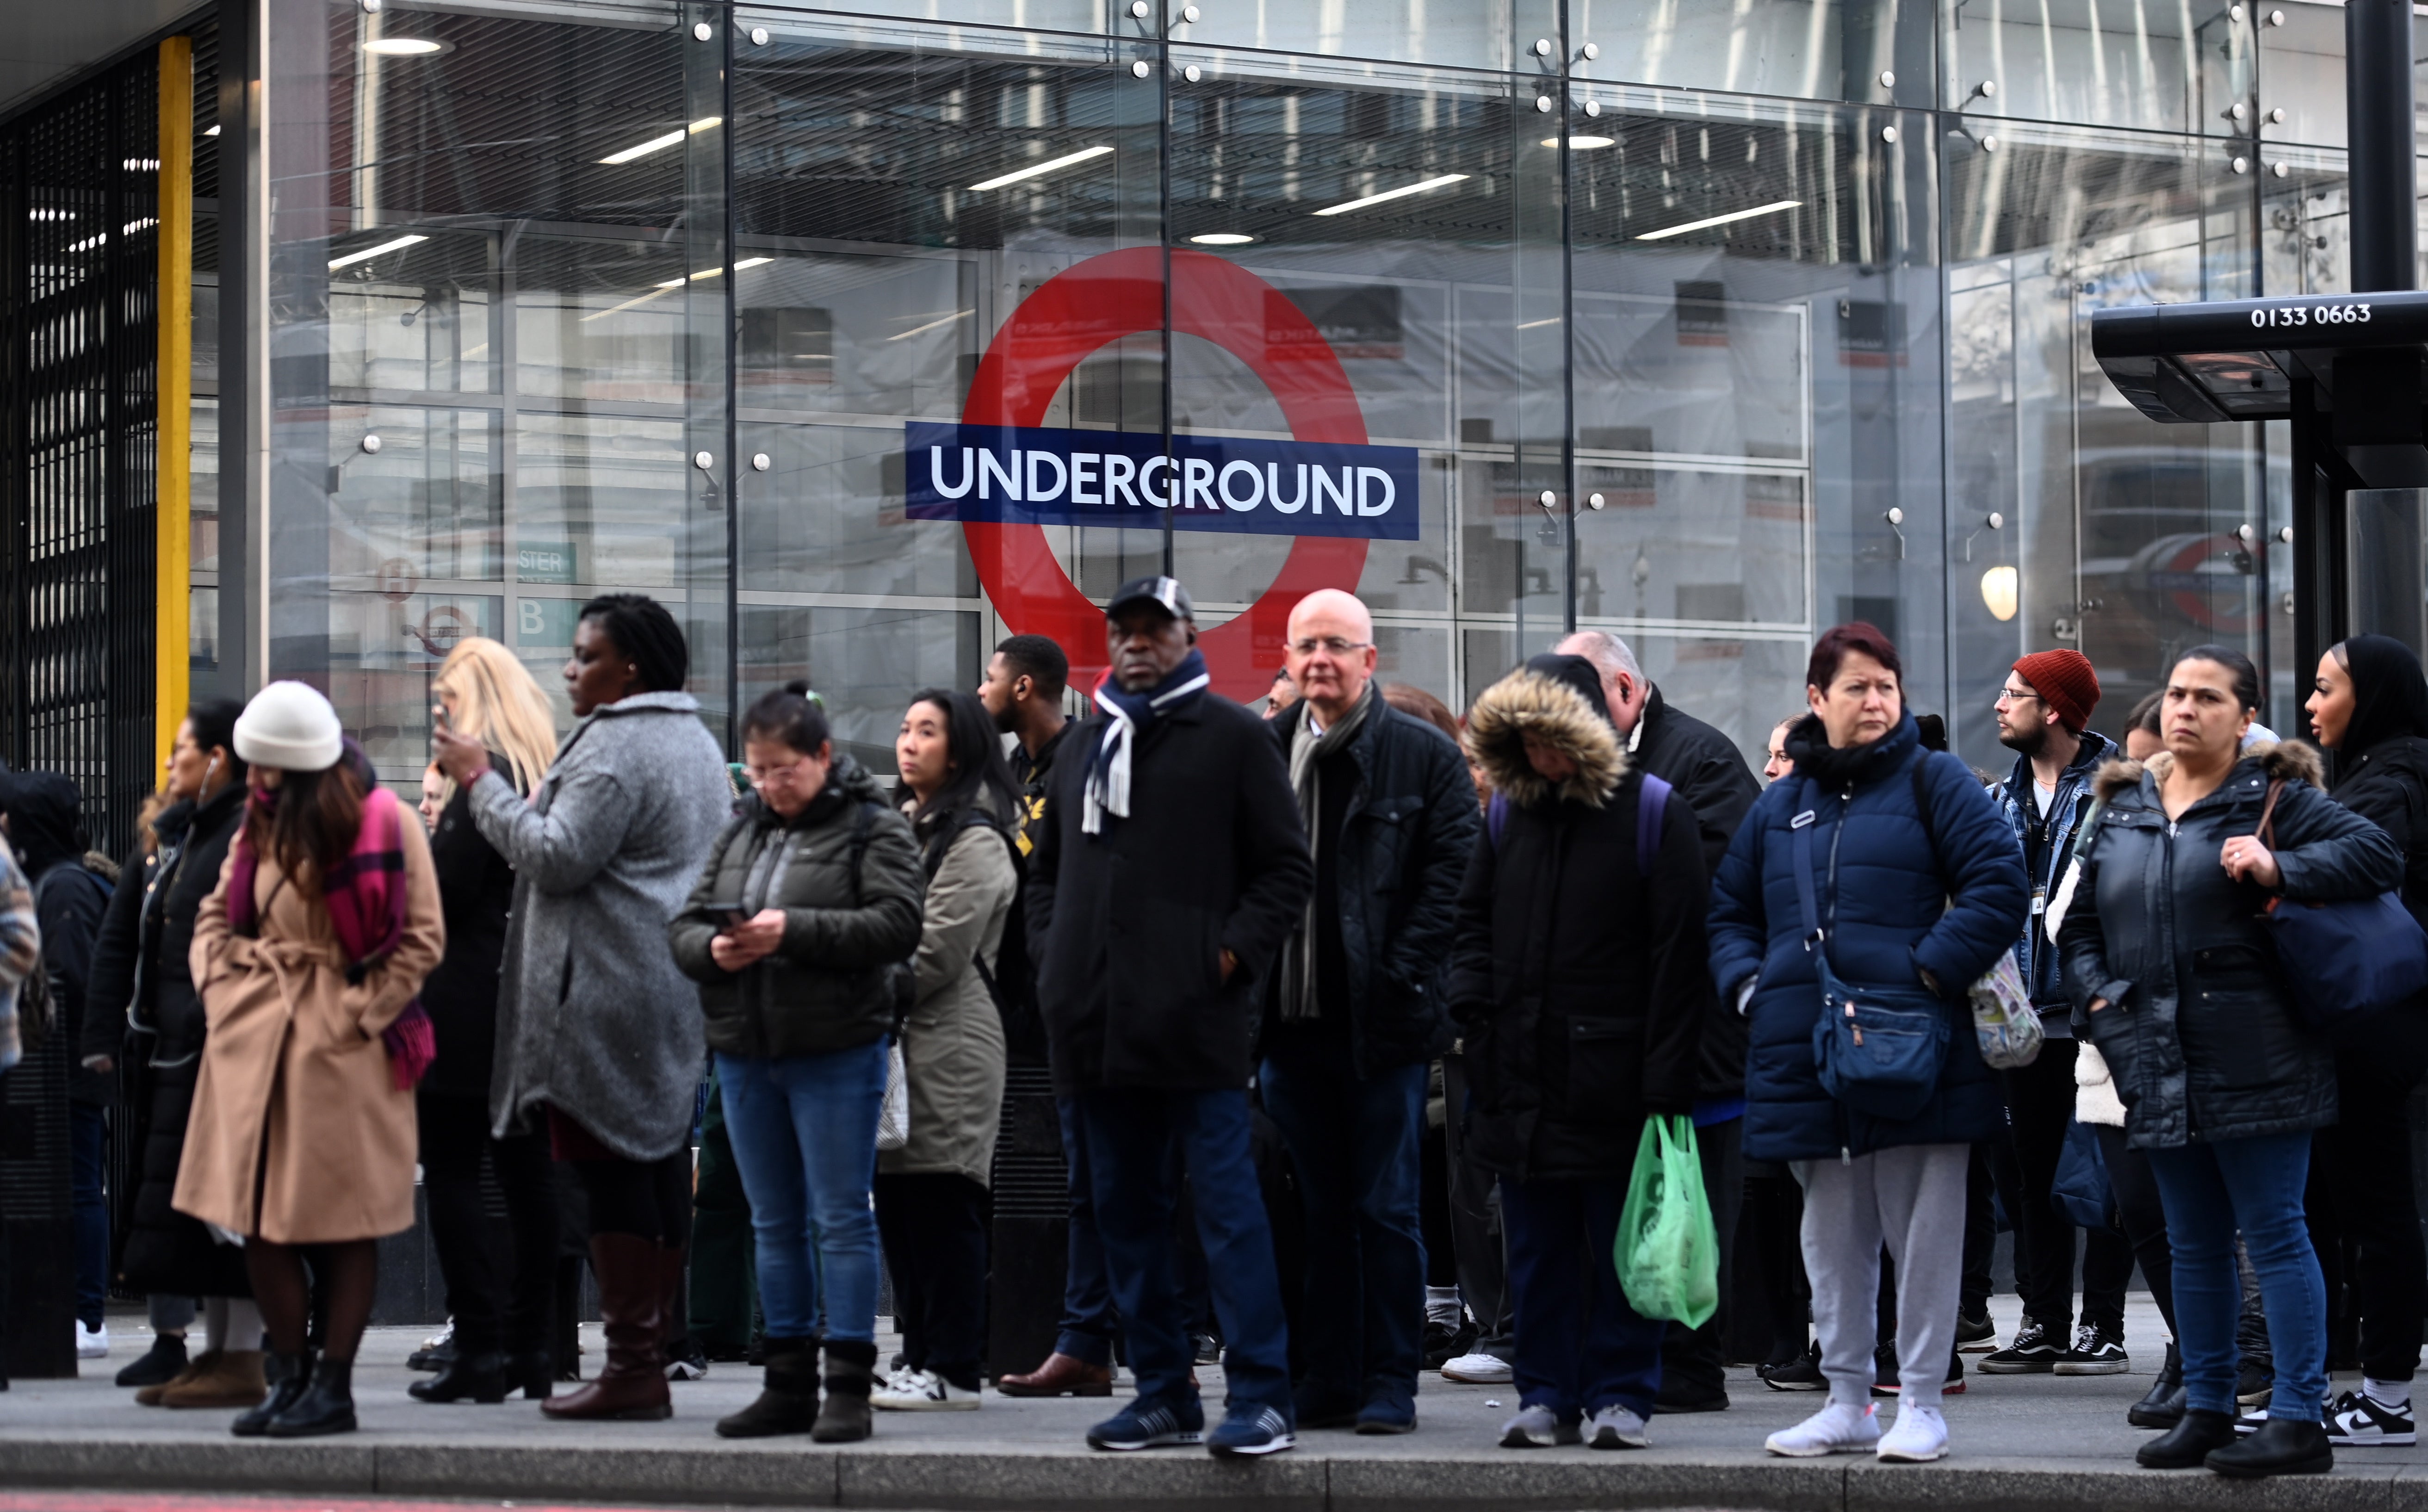 People queue for buses outside Victoria train station in London on Wednesday 15 March